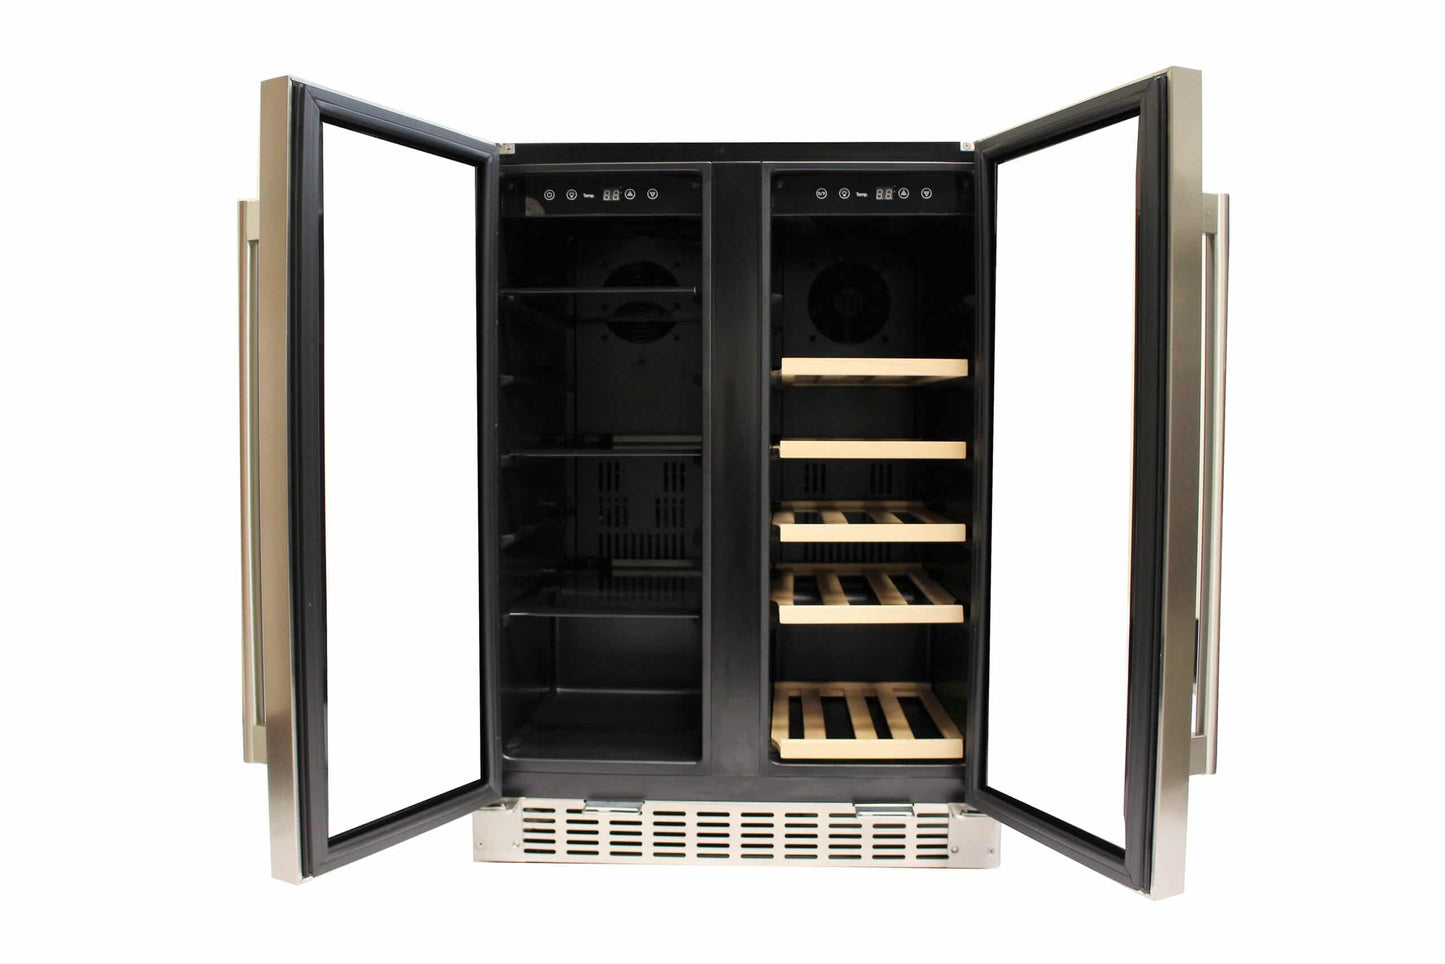 Azure Home Products A124DZS Dual Zone Beverage/Wine Center